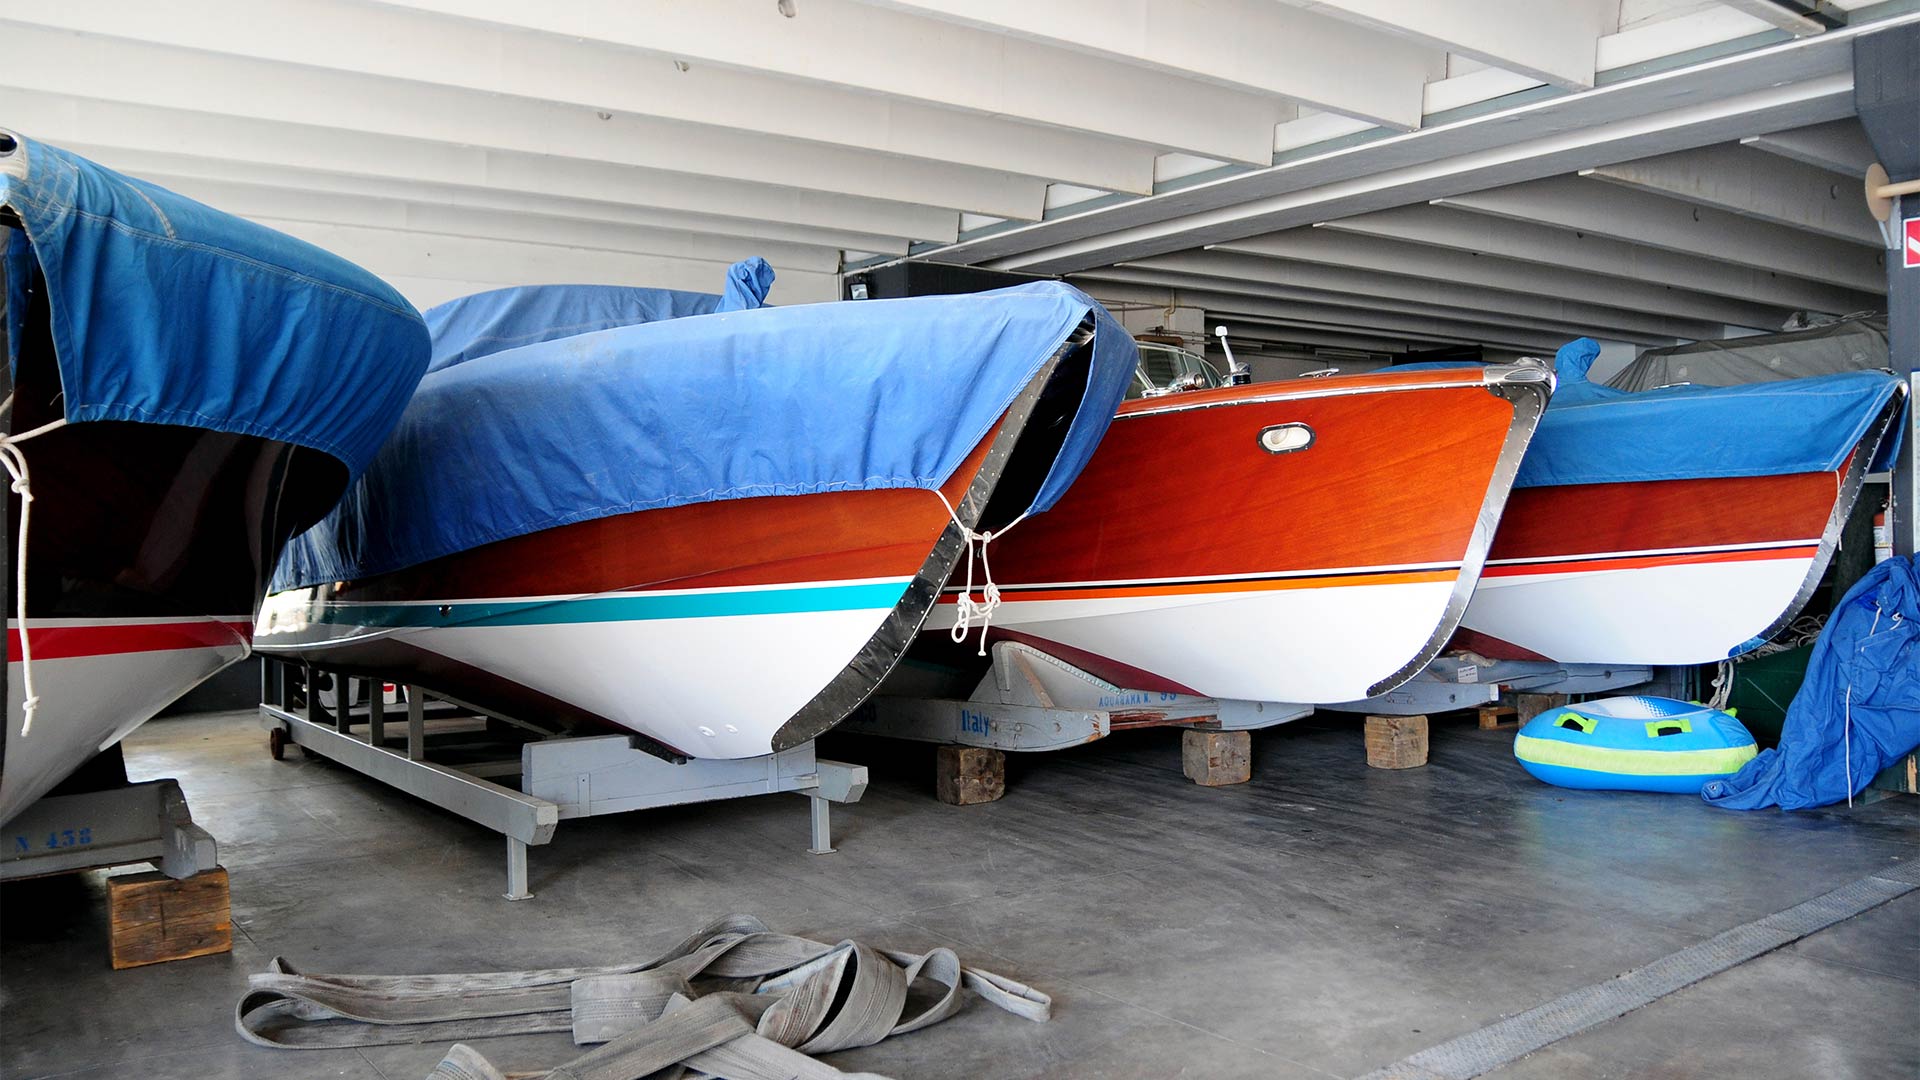 boats in storage building harrisburg sd